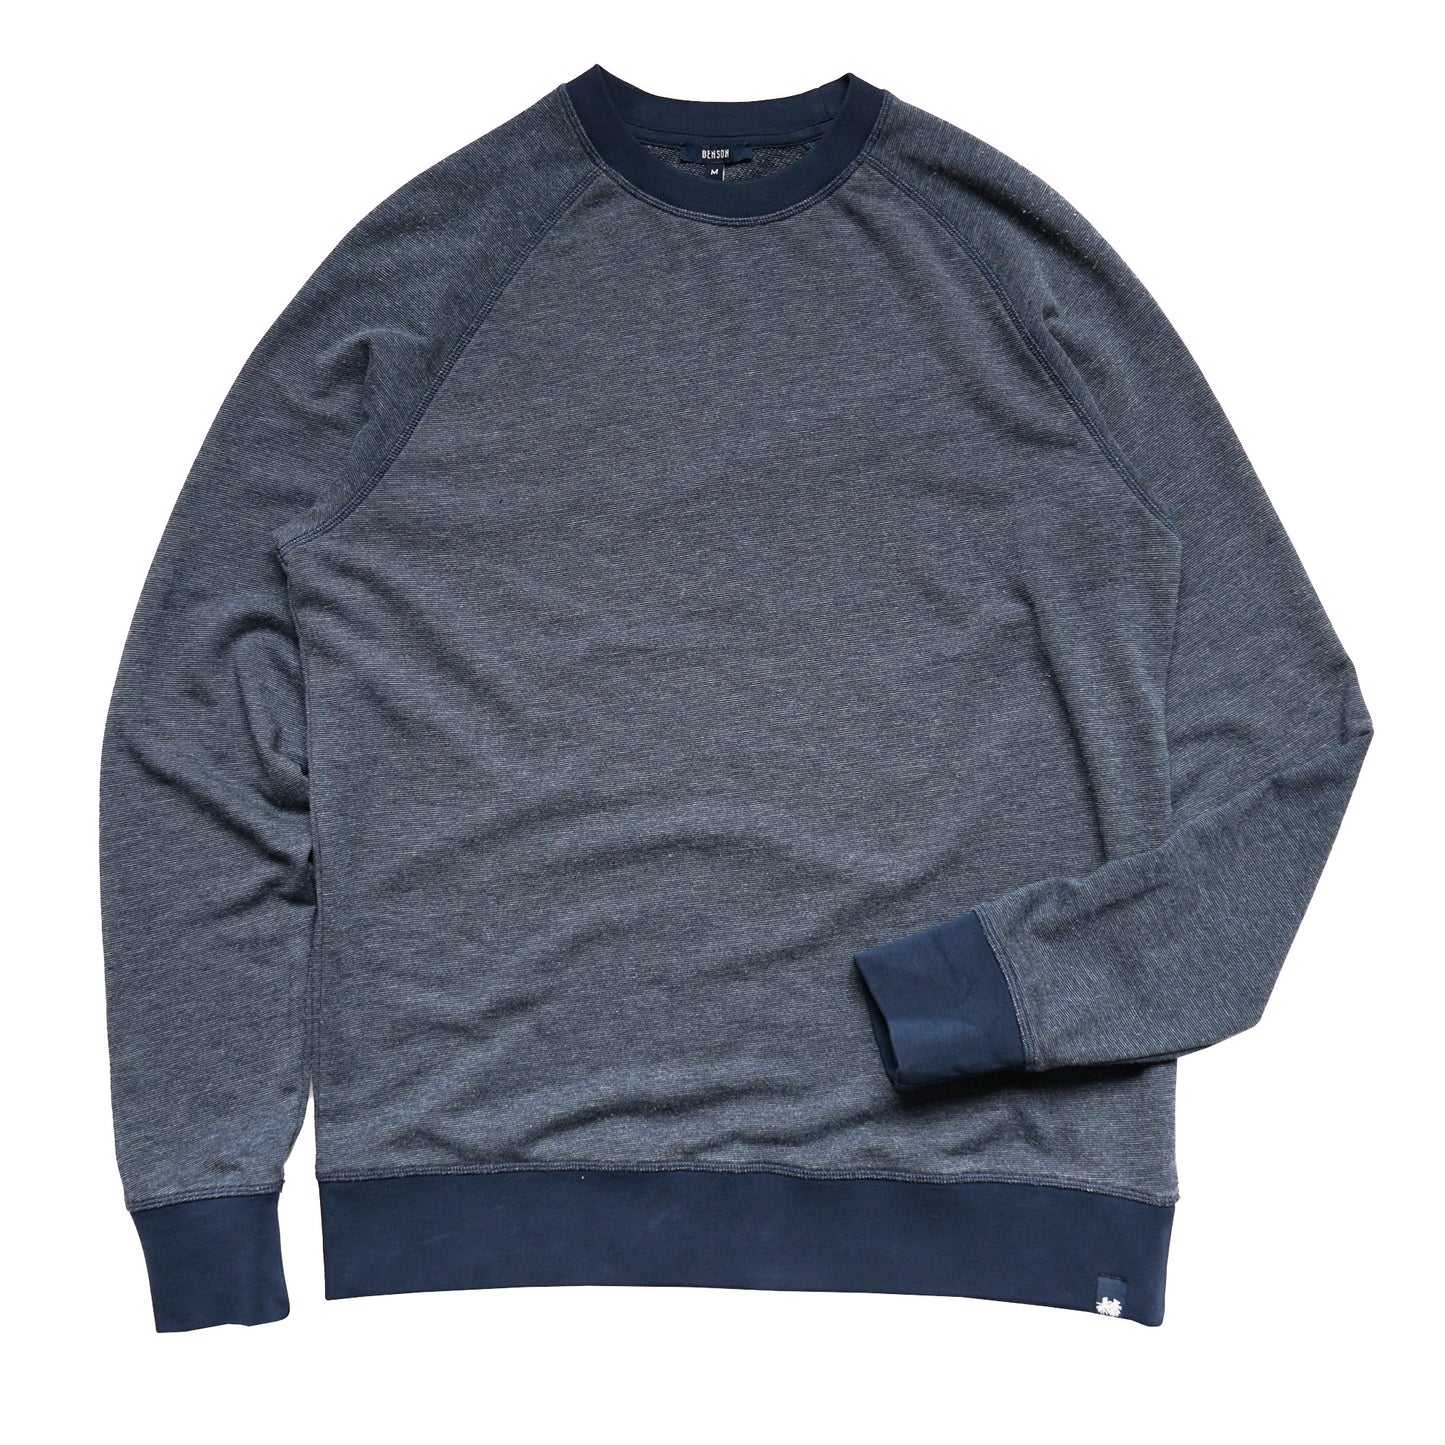 Whistler French Terry Oil-Washed Navy Sweatshirt